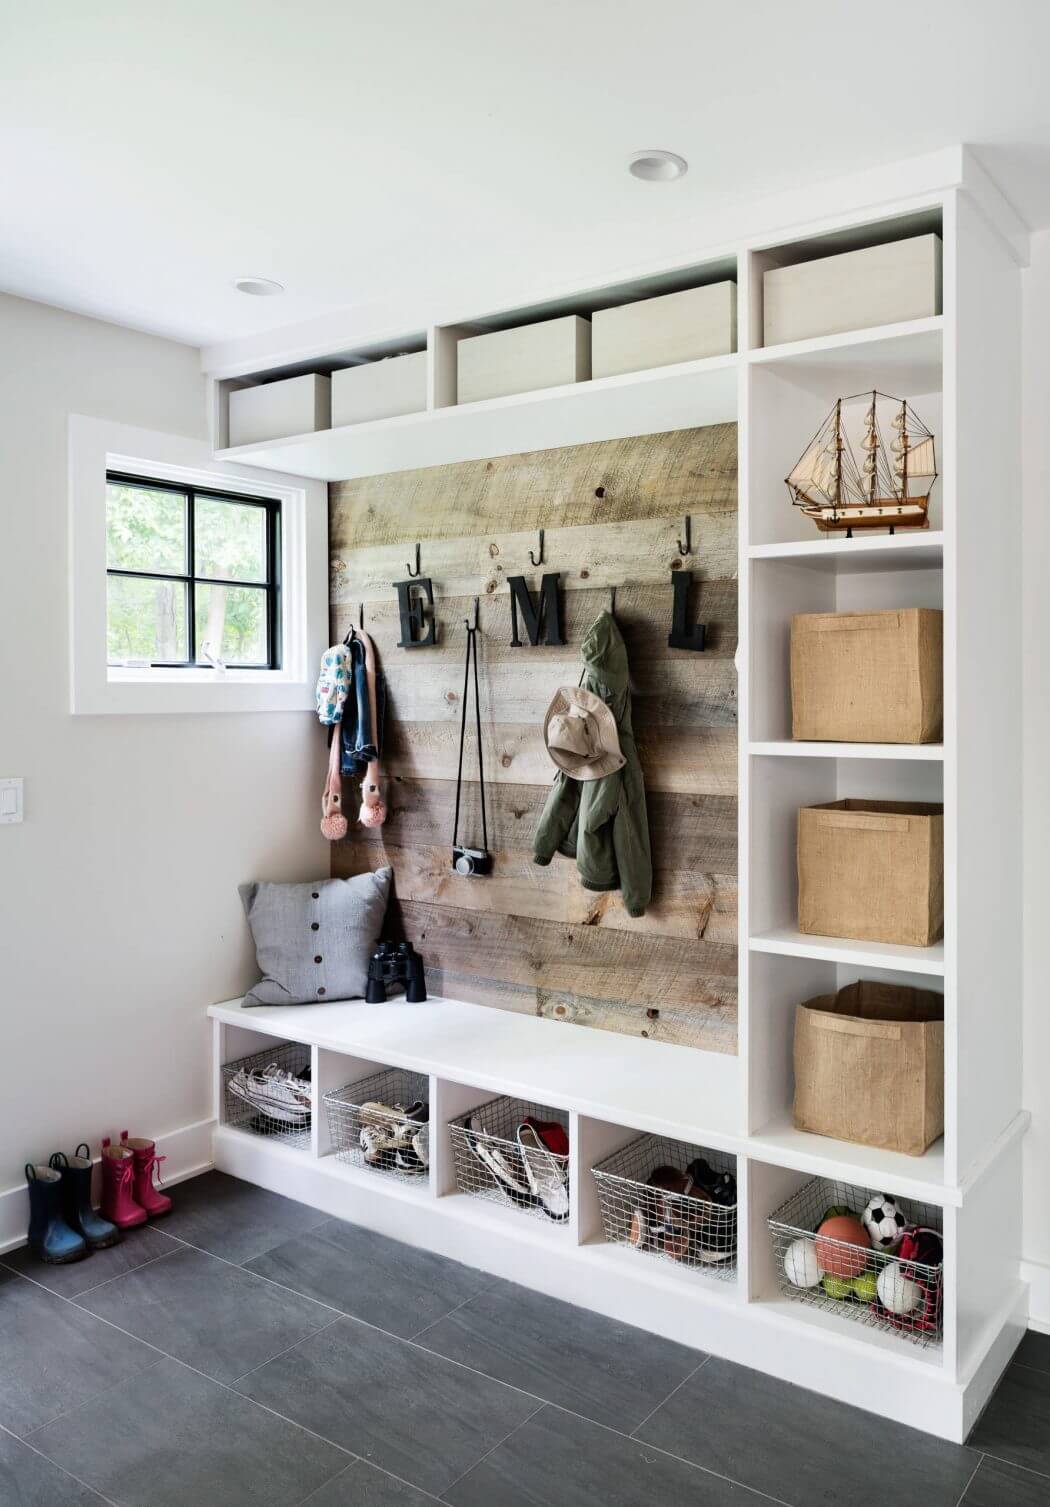 A modern mudroom with a rustic wood accent wall, built-in storage, and wire baskets.